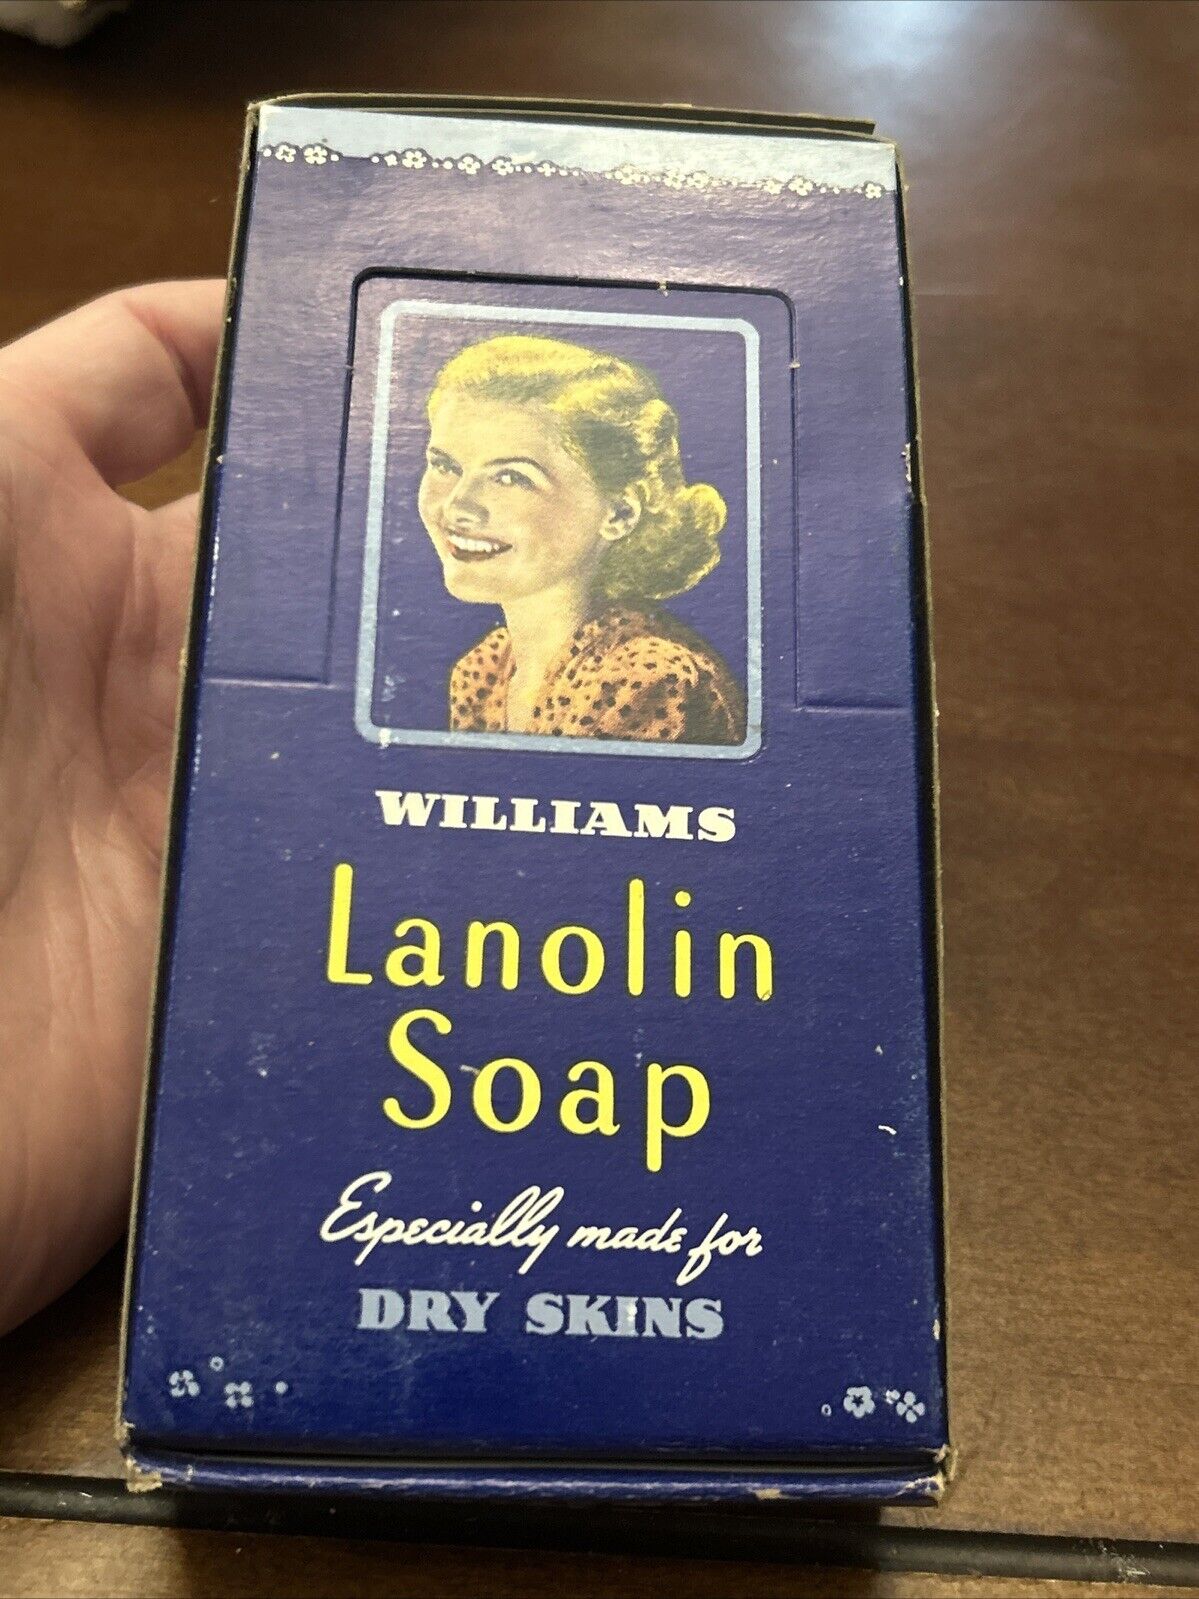 Vintage Williams Lanolin Soap Complete Graphic Store Display With Unopened Bars